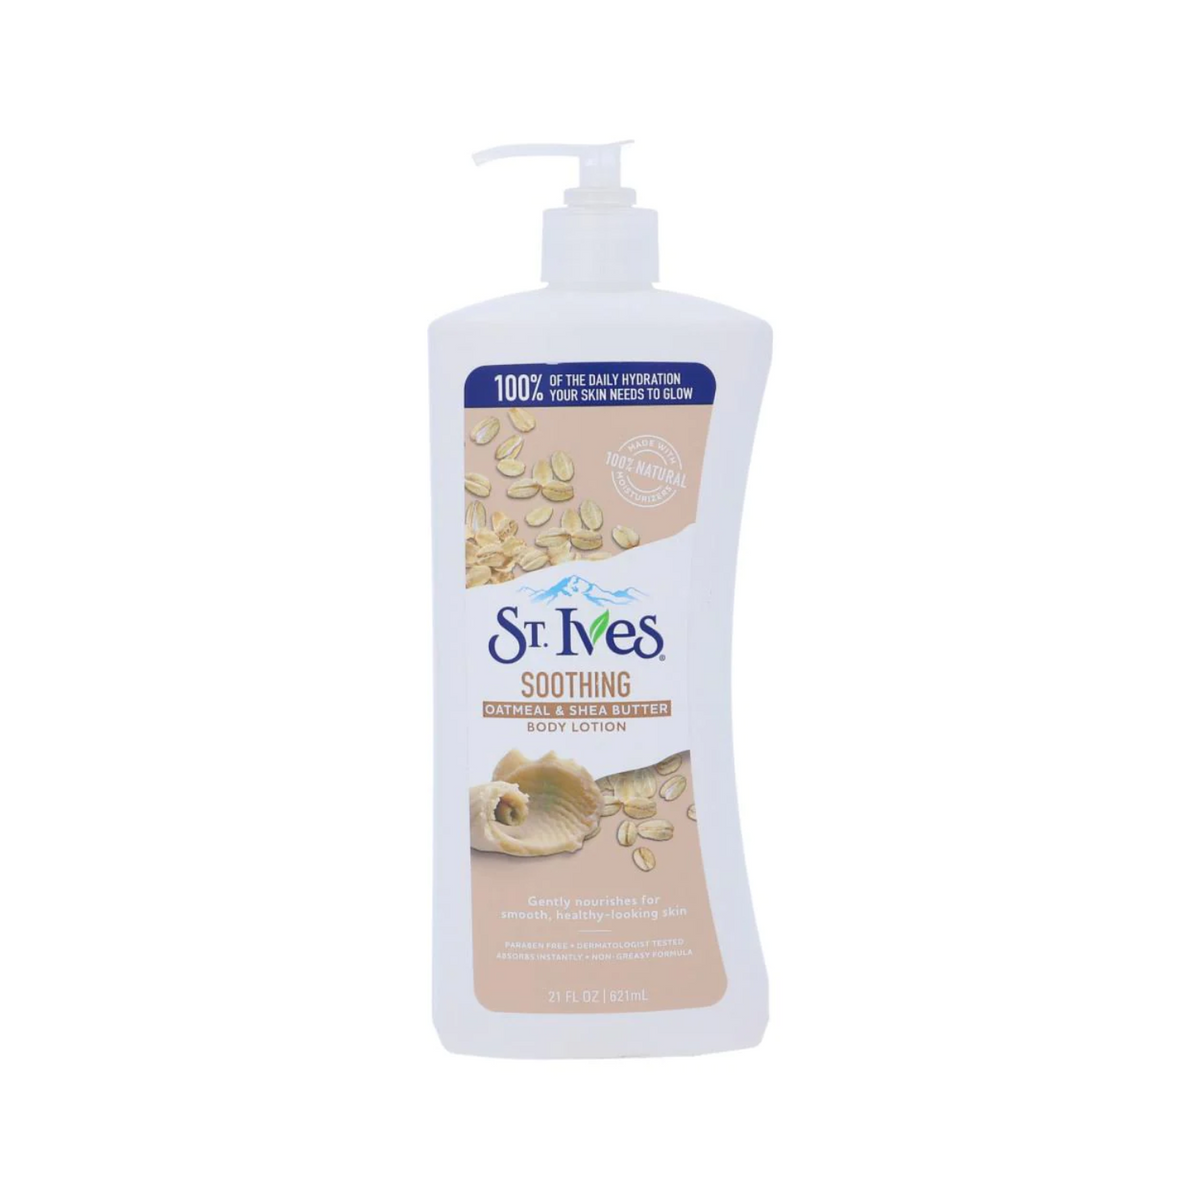 st-ives-soothing-oatmeal-shea-butter-body-lotion-621ml